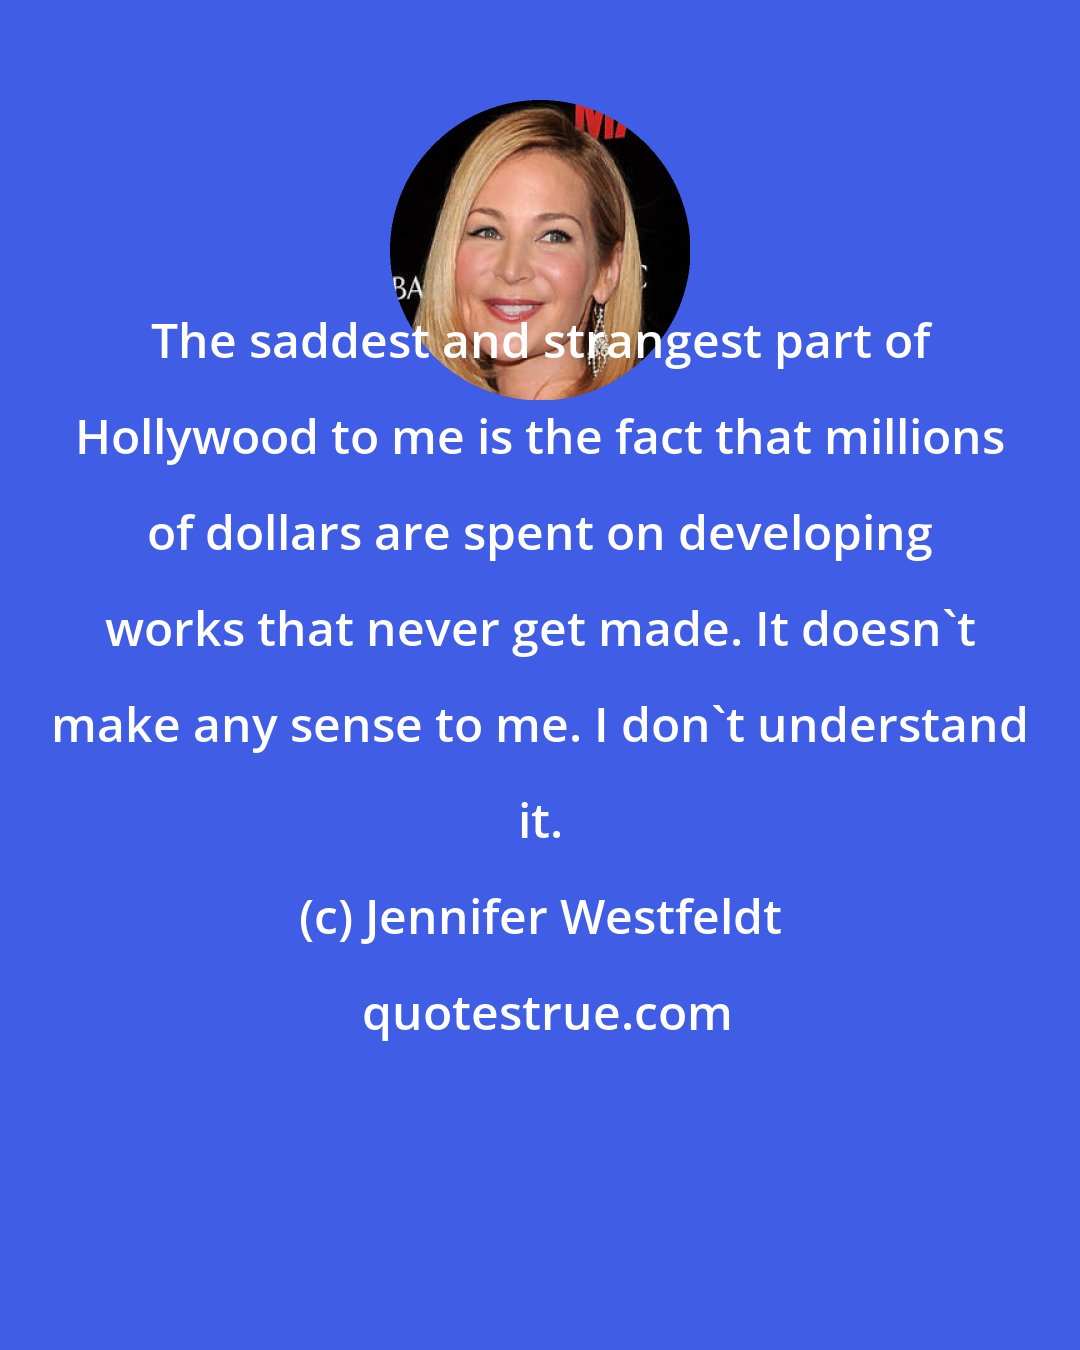 Jennifer Westfeldt: The saddest and strangest part of Hollywood to me is the fact that millions of dollars are spent on developing works that never get made. It doesn't make any sense to me. I don't understand it.